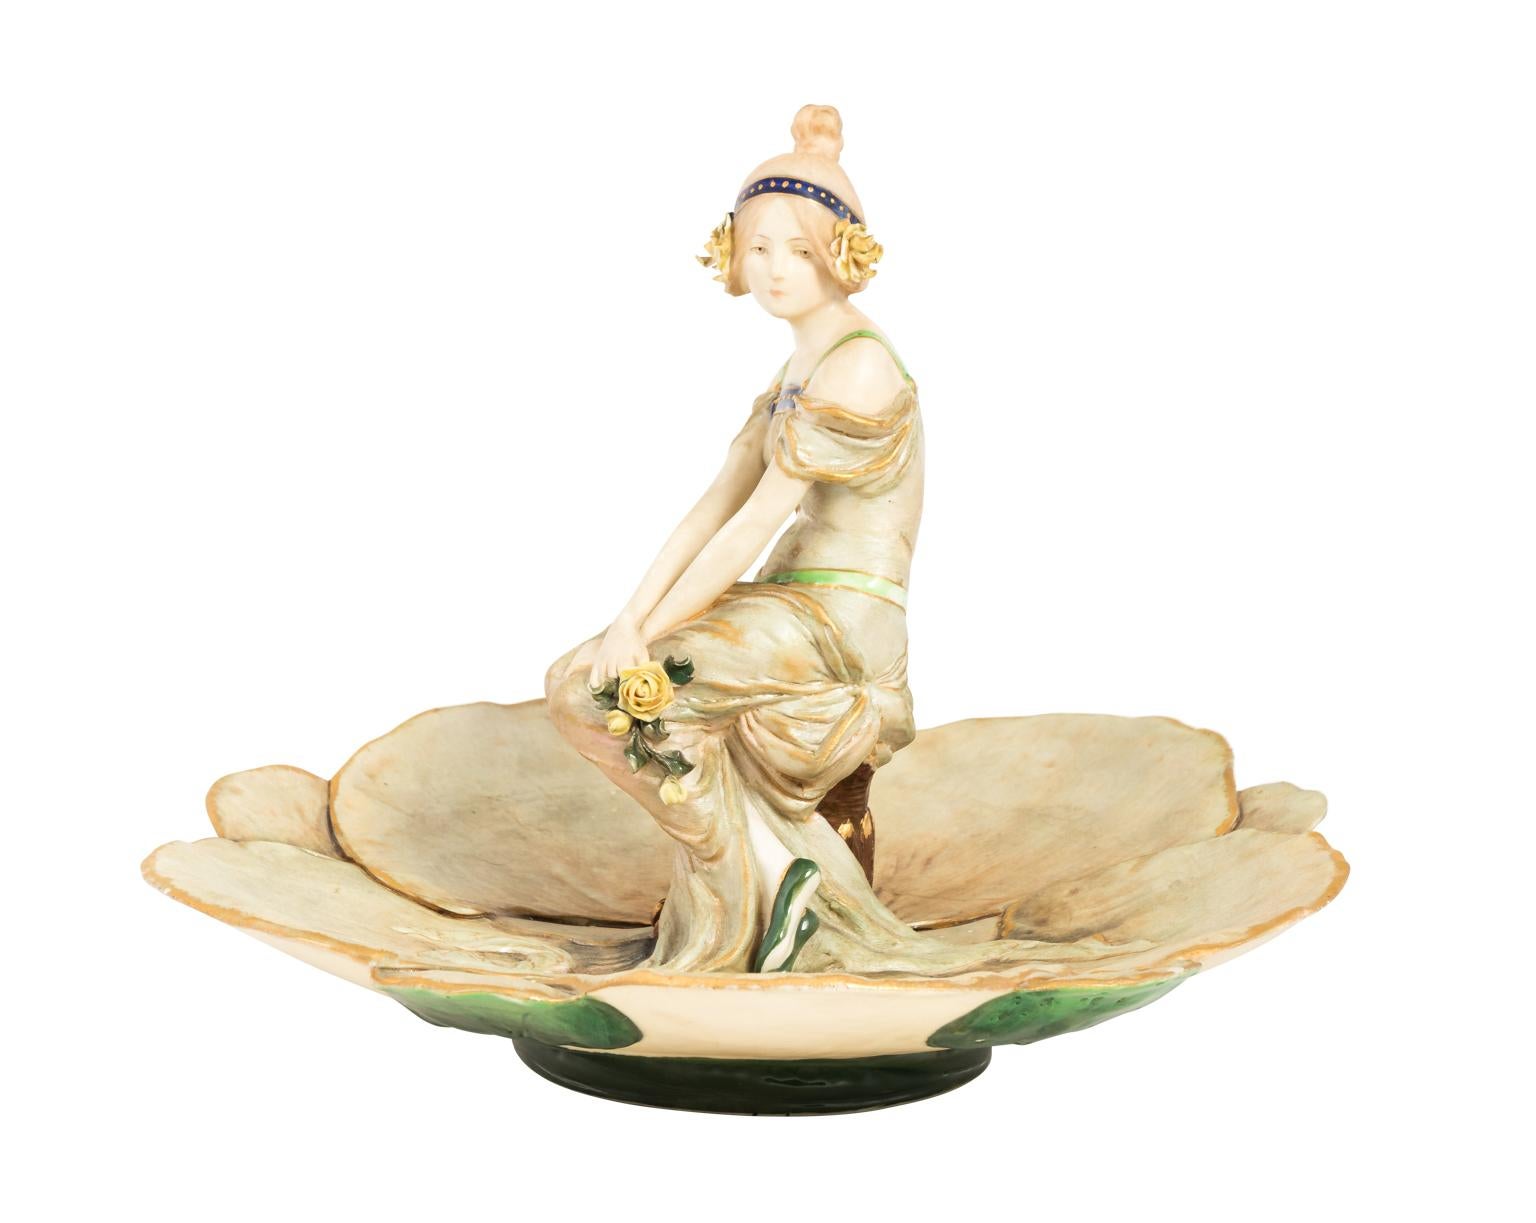 Porcelain figural Art Nouveau style amphora dish from Austria with a layered flower shaped base in a painted finish, circa early 20th century.
 